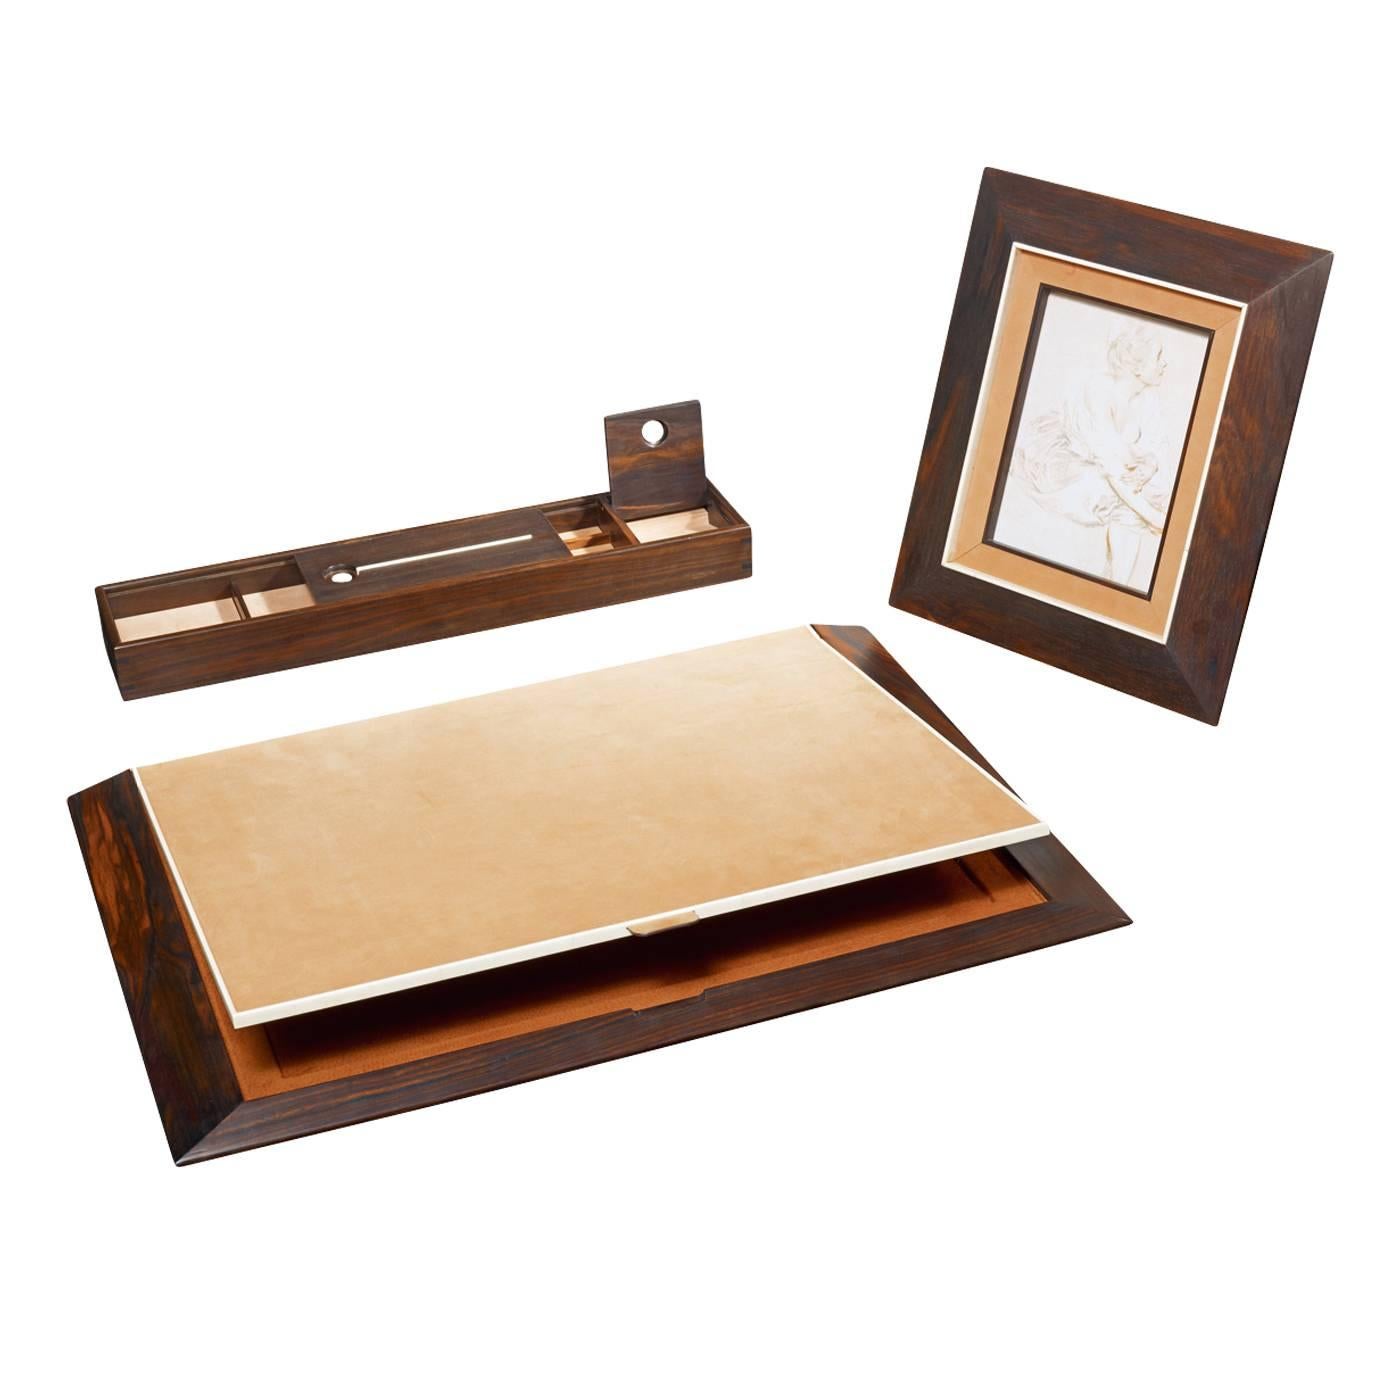 This elegant desk pad in ebony wood has a shutter covered in nubuck leather and it is highlighted at the edges with a horn frame. The interior is finished with a contrasting color. 

 